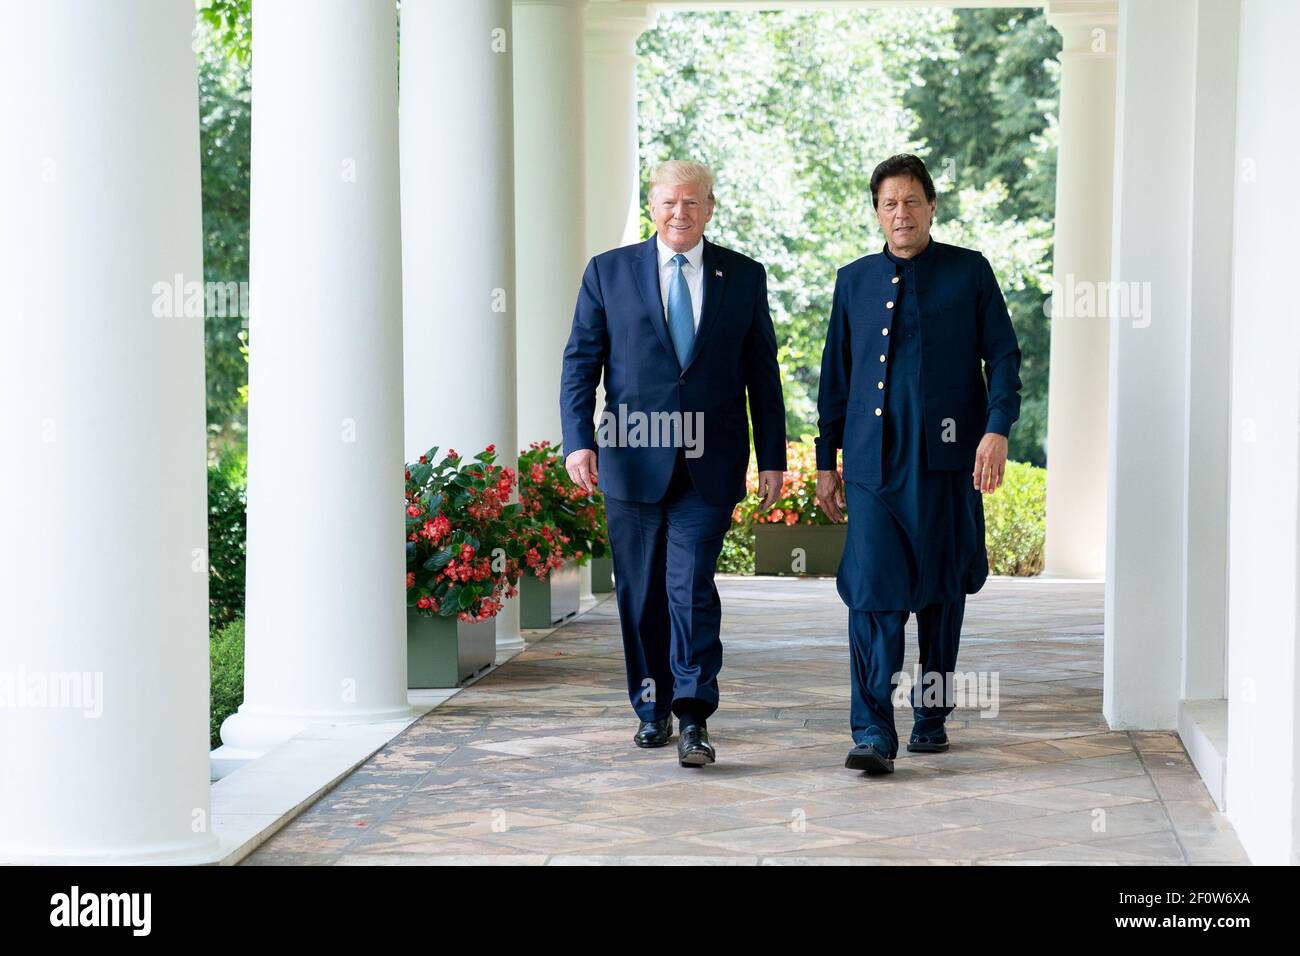 President Donald Trump walks with Prime Minister Imran Khan of the Islamic Republic of Pakistan on Monday July 22 2019 along the West Wing Colonnade of the White House. Stock Photo